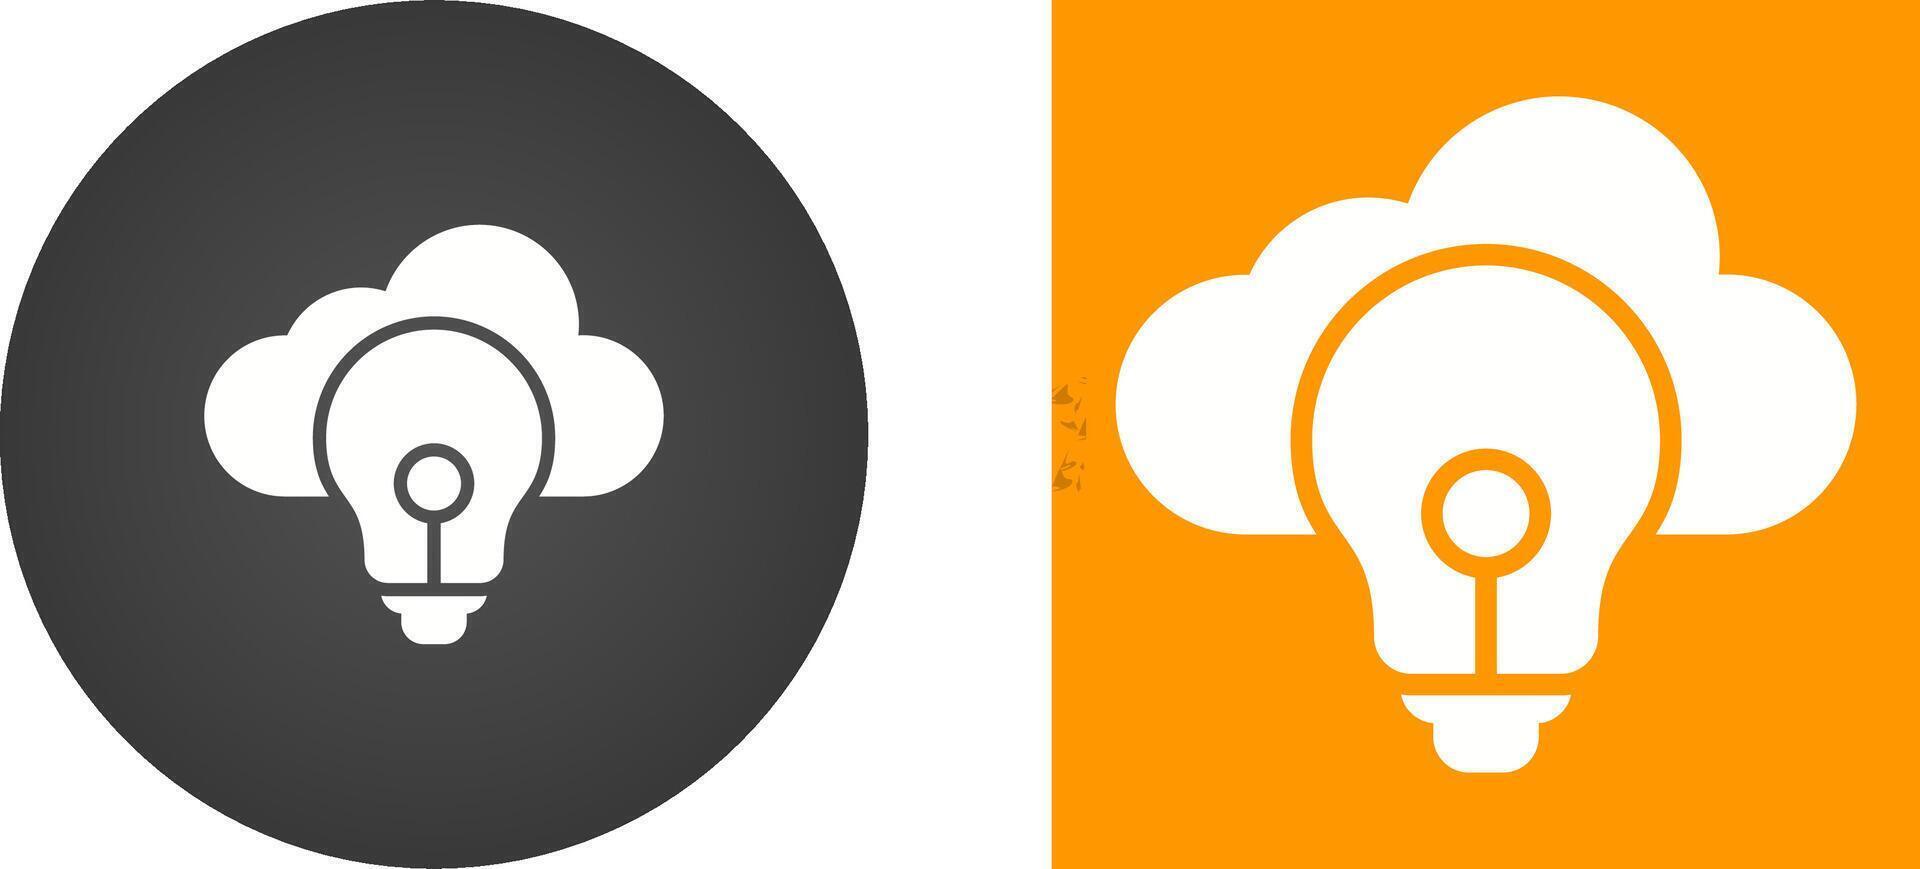 Cloud Strategy Vector Icon